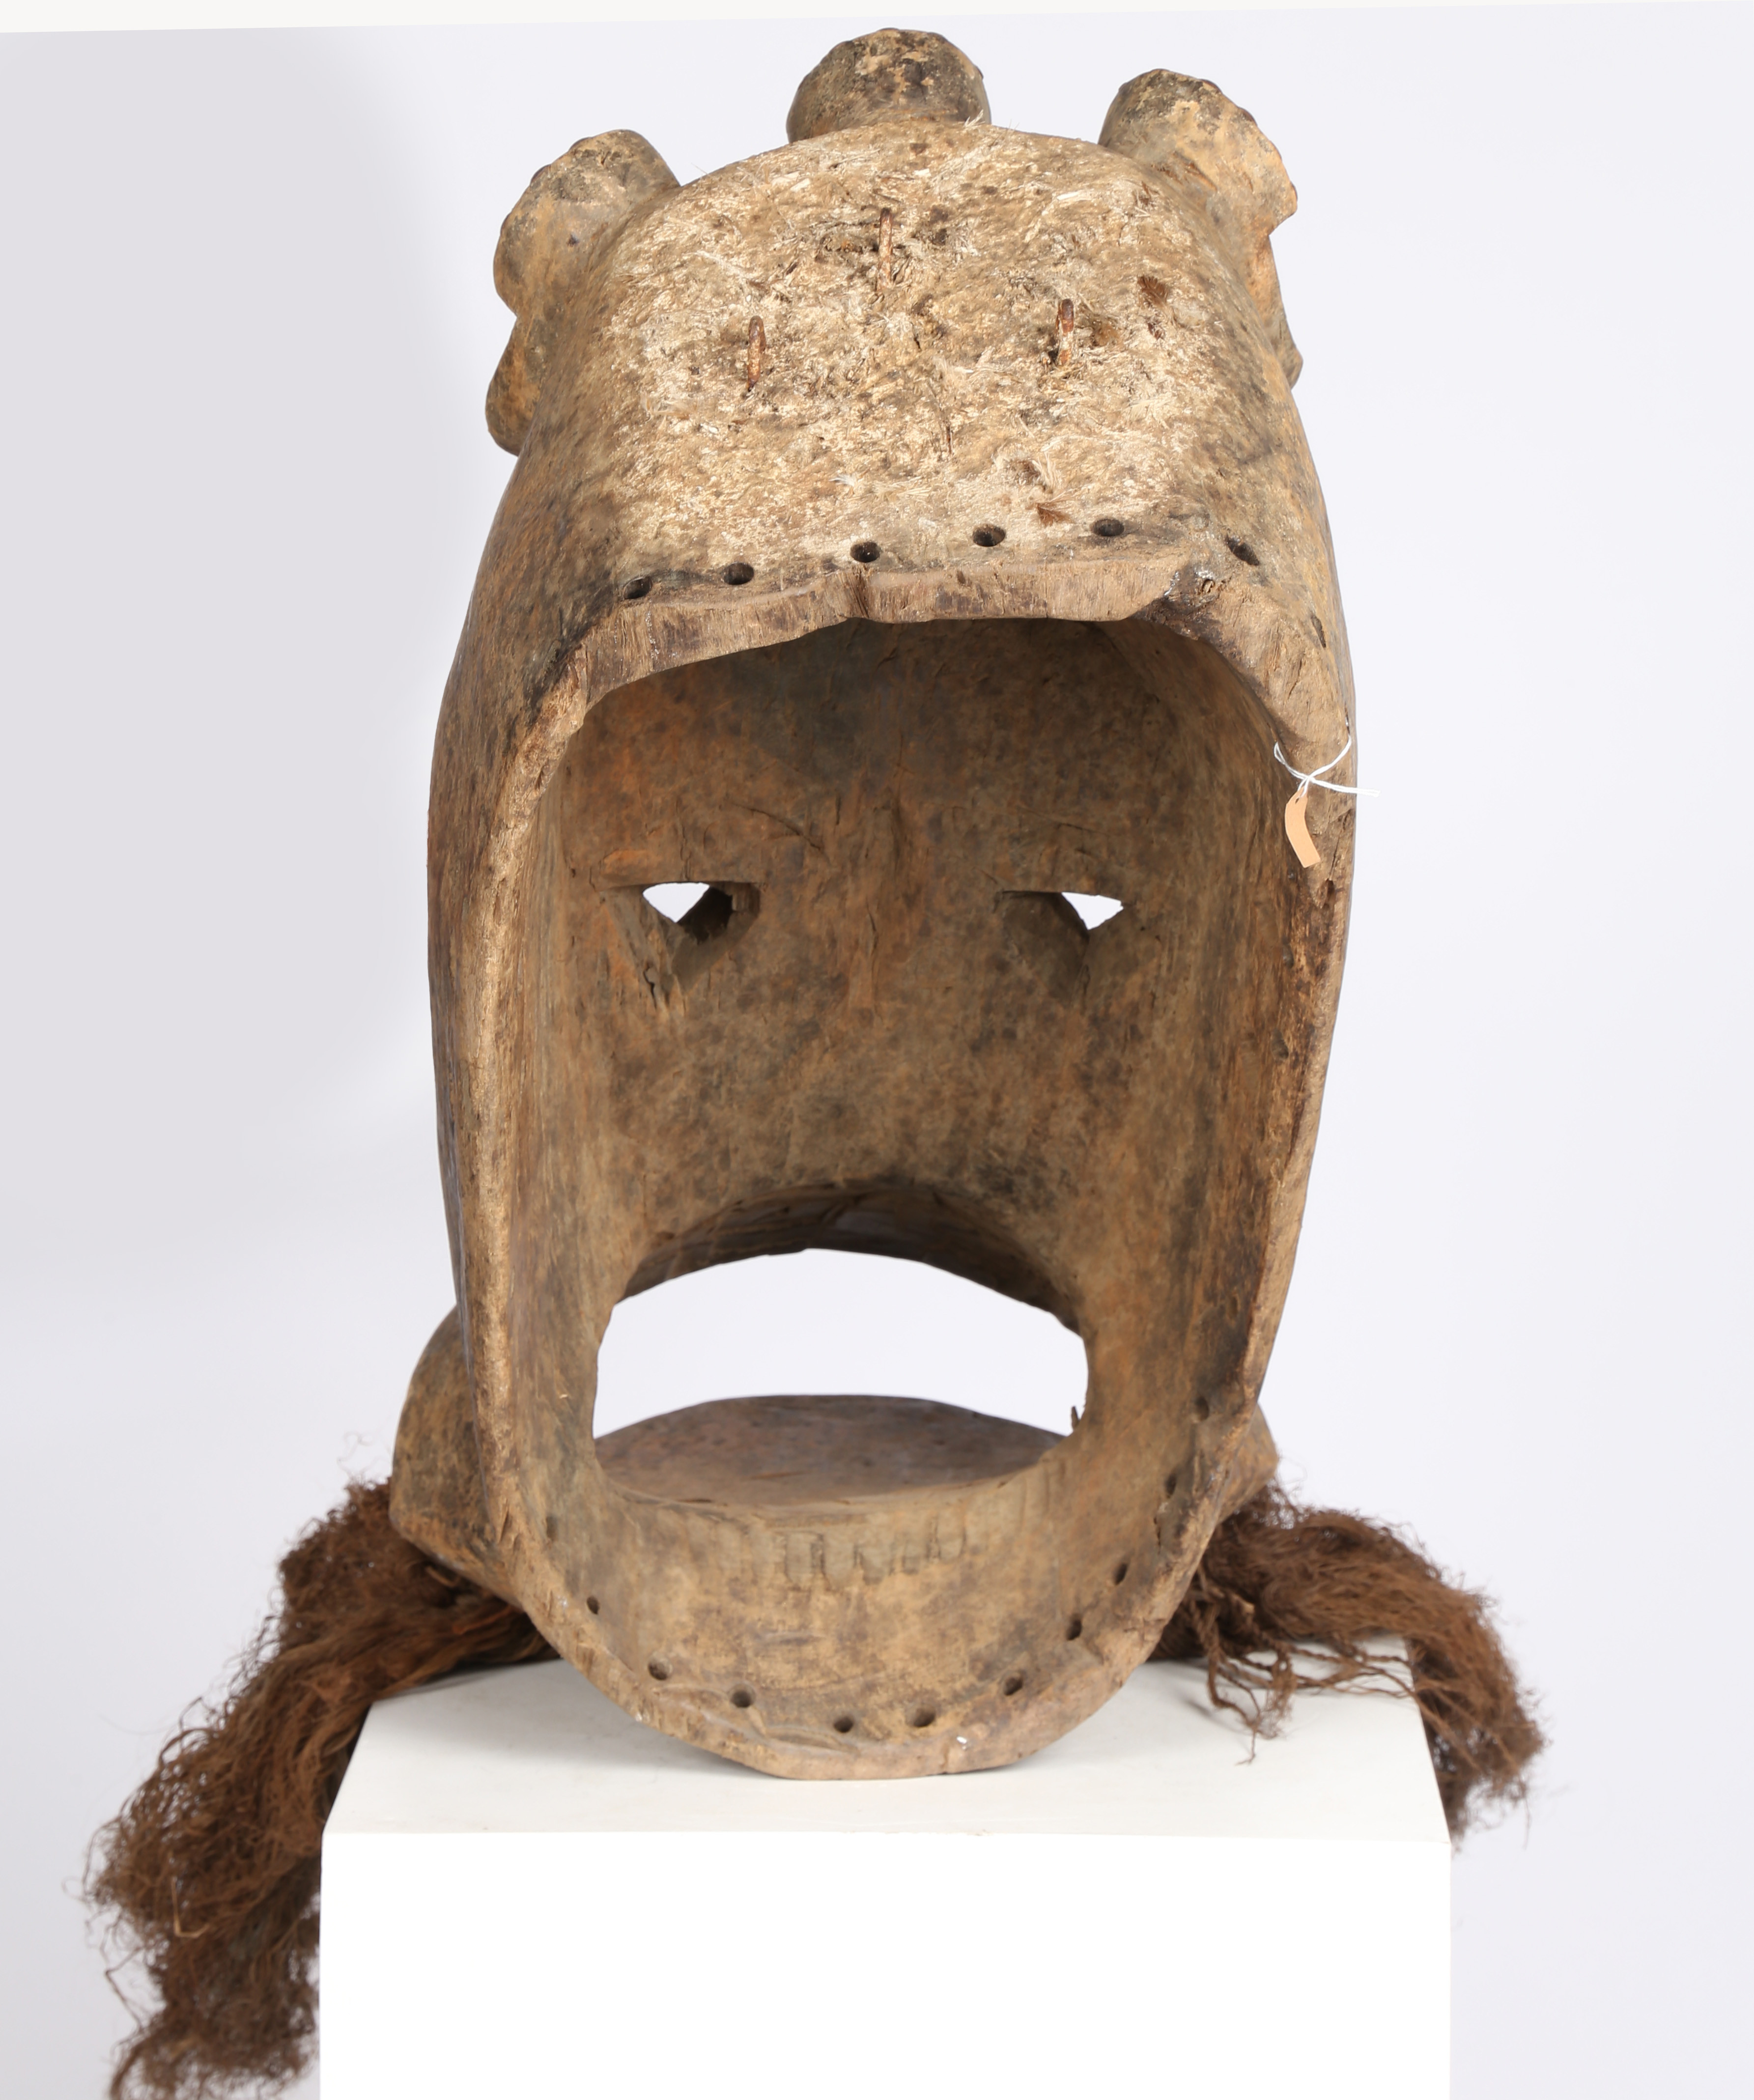 A EXTREMELY LARGE DAN KRAN MASK, LIBERIA. - Image 7 of 7